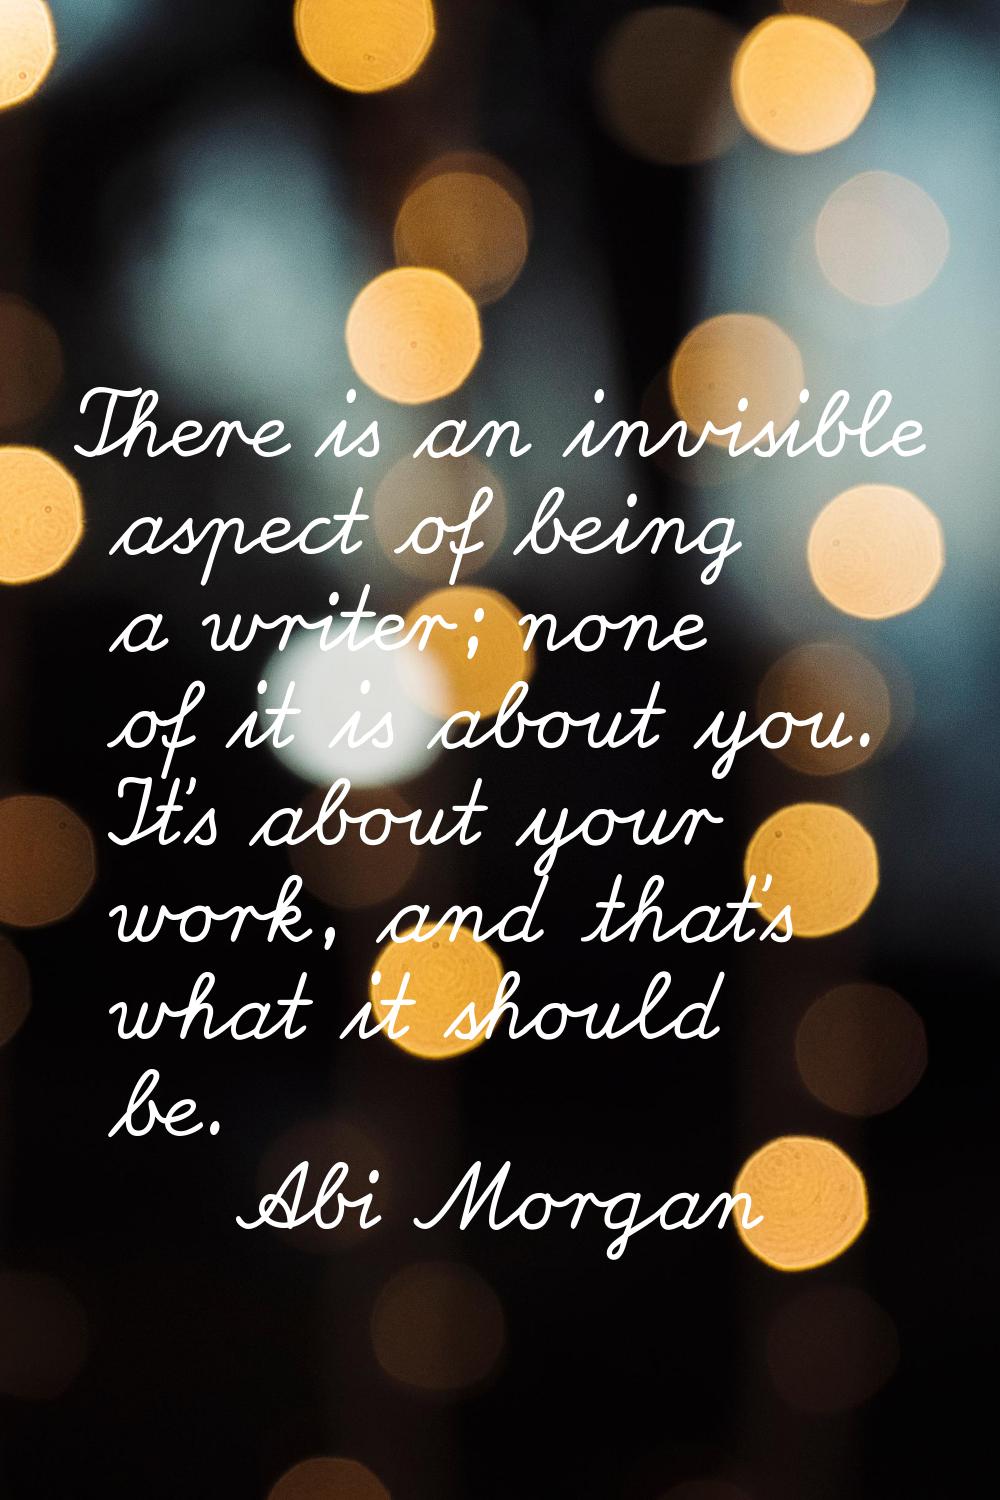 There is an invisible aspect of being a writer; none of it is about you. It's about your work, and 